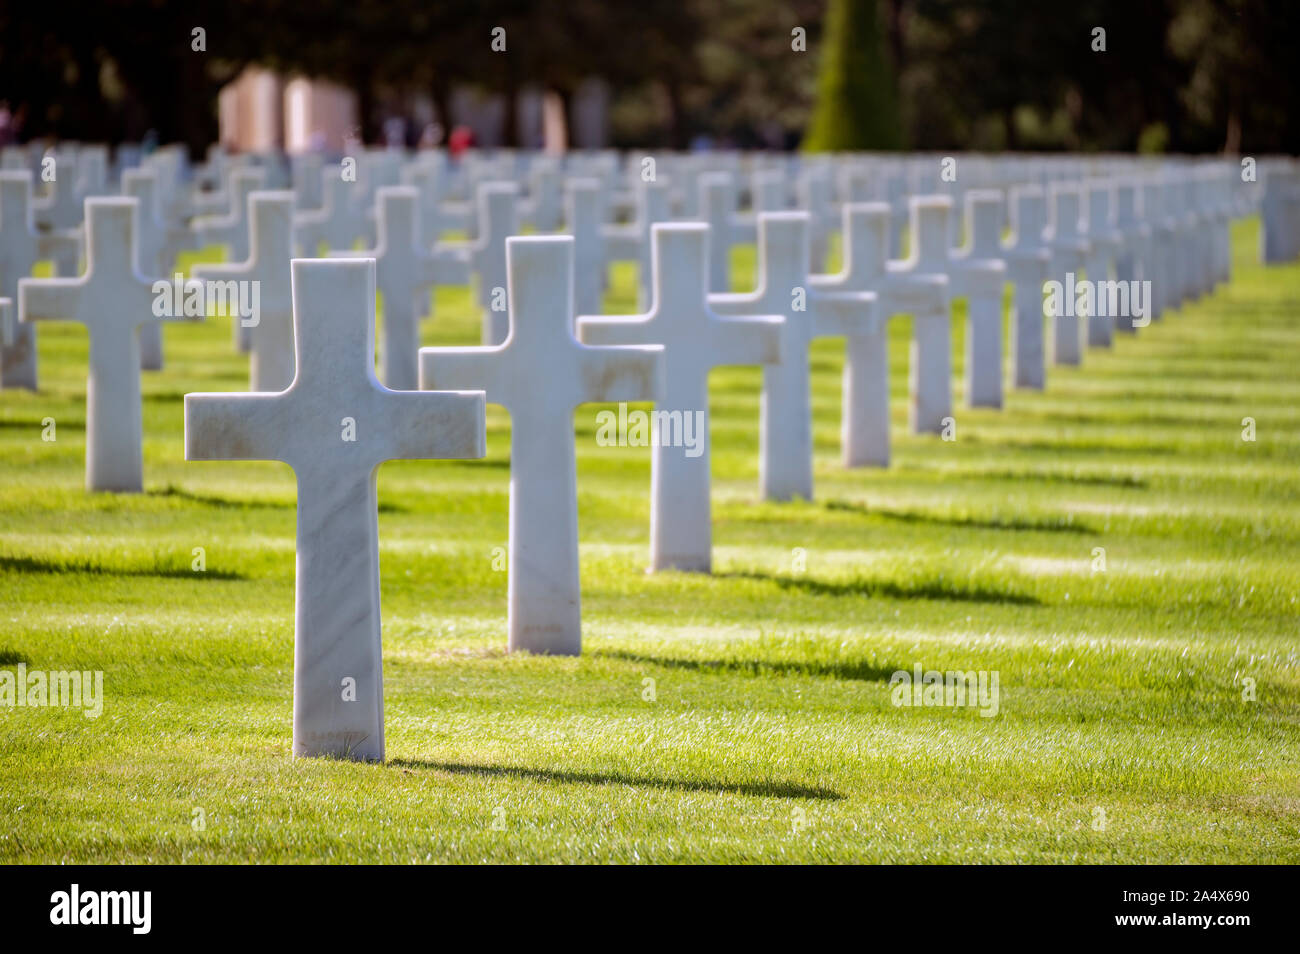 Headstones of the dead soldiers at the Normandy landing in the American cemetery of Colleville-sur-Mer, France Stock Photo